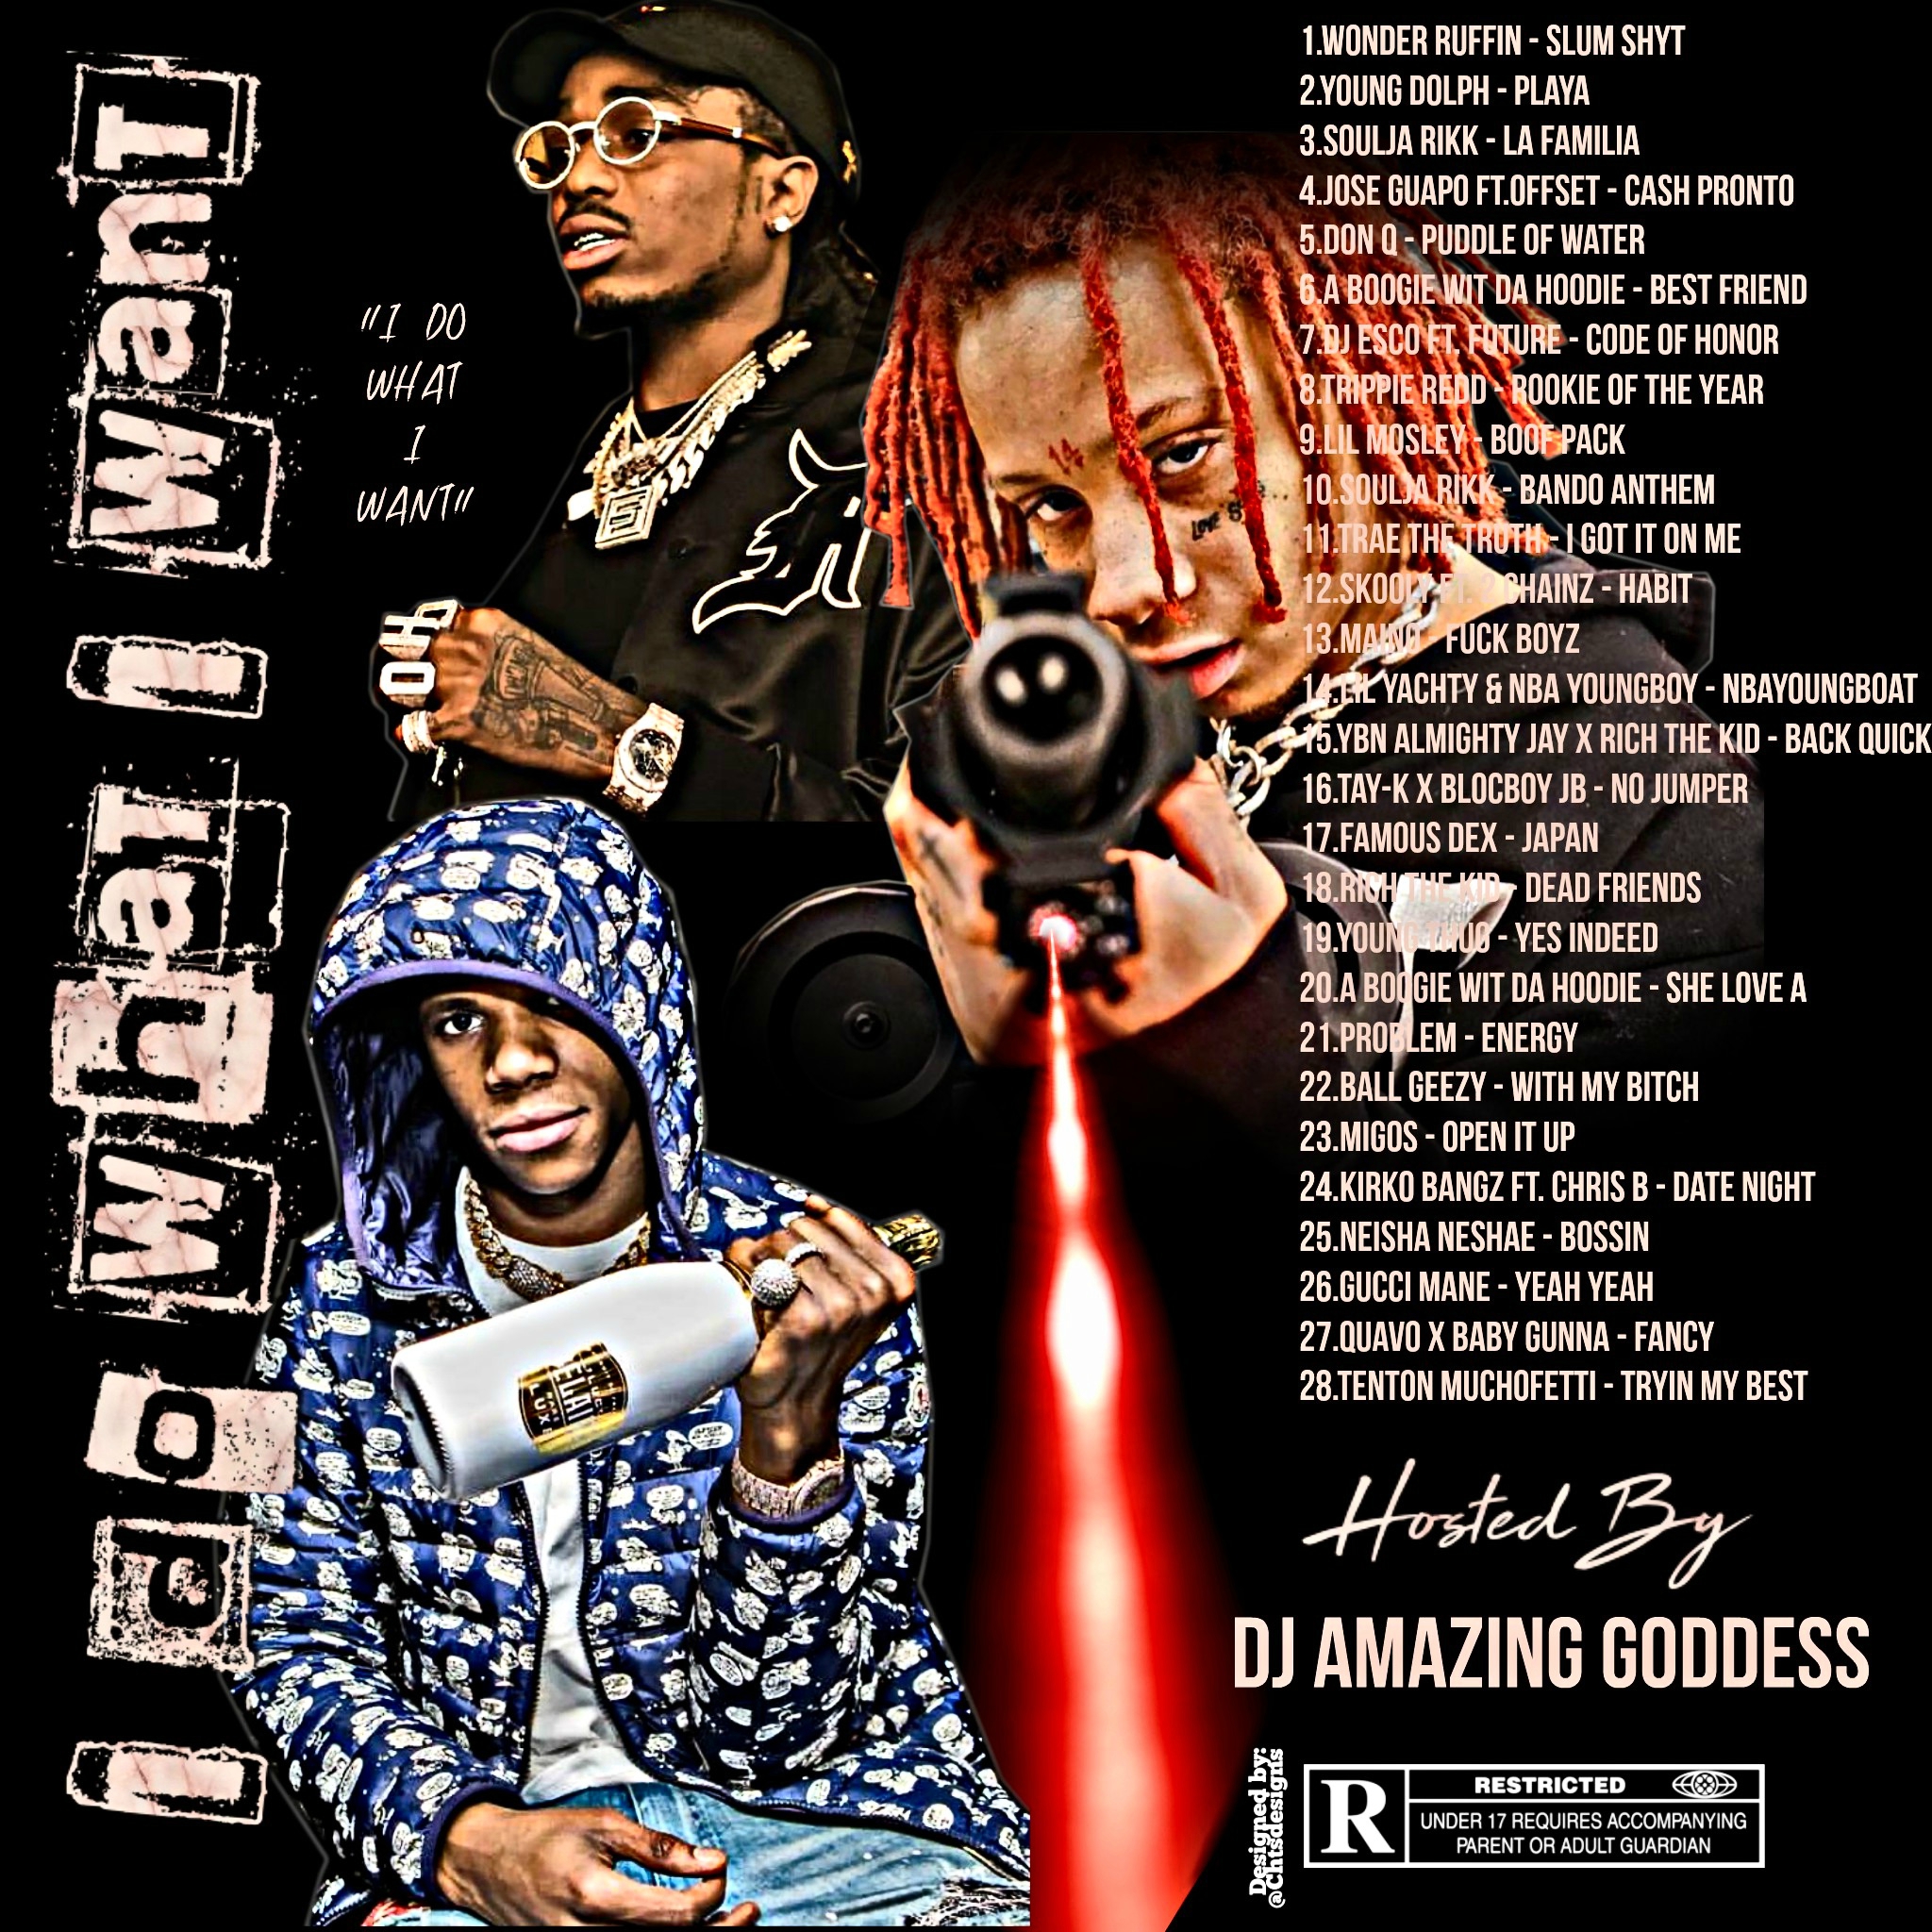 Gucci Mane,Dave Lanez,Rich The Kid,Famous Dex,Migos,A Boogie,Don Q,Young Dolph – I Do What I Want by DJ Amazing Goddess Mixtape Download